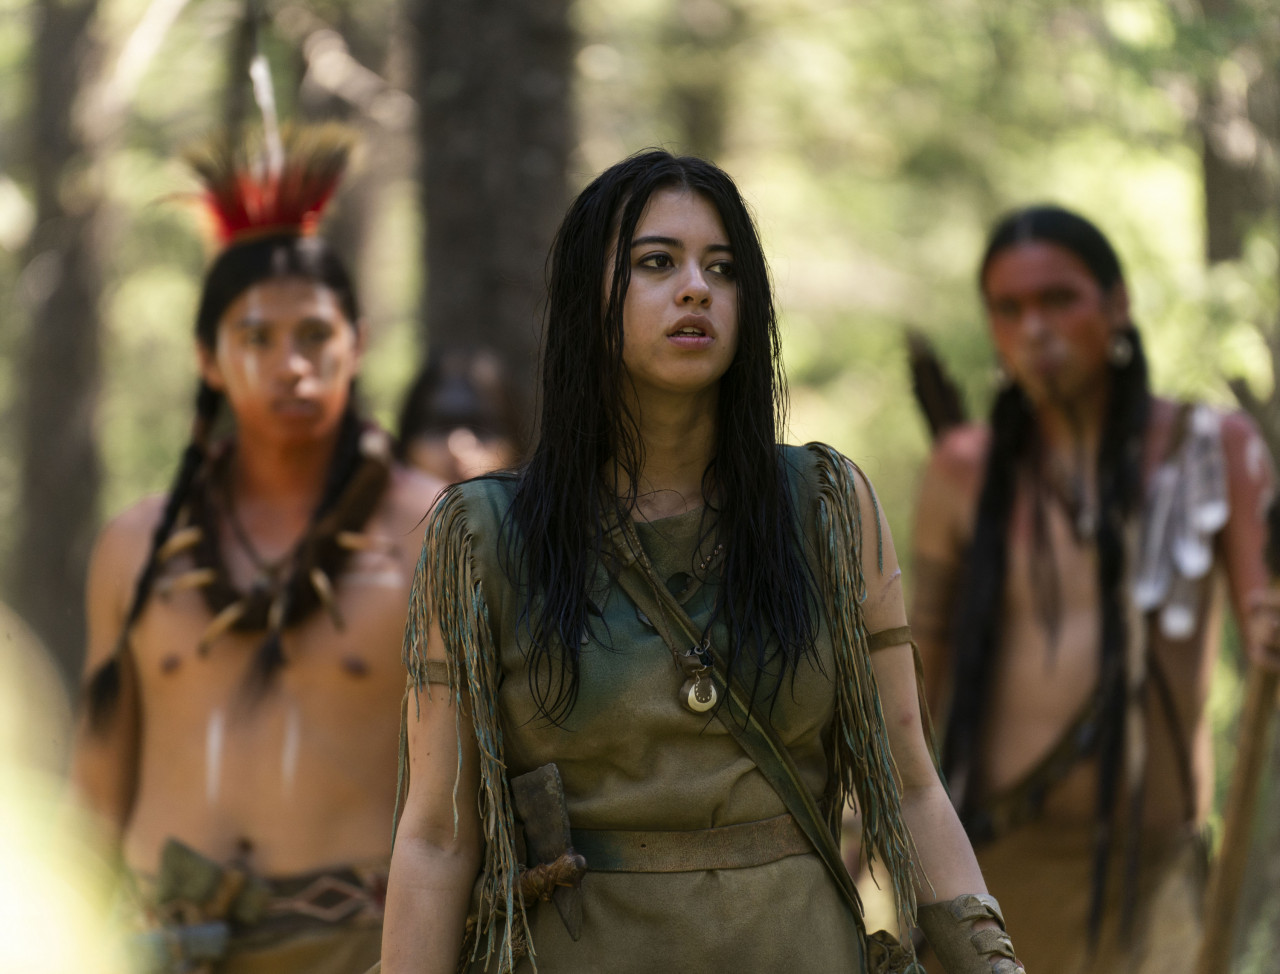 Prey follows Naru (Amber Midthunder), a young woman of the Comanche Nation who is out to prove her worth as a warrior. – 20th Century Studios